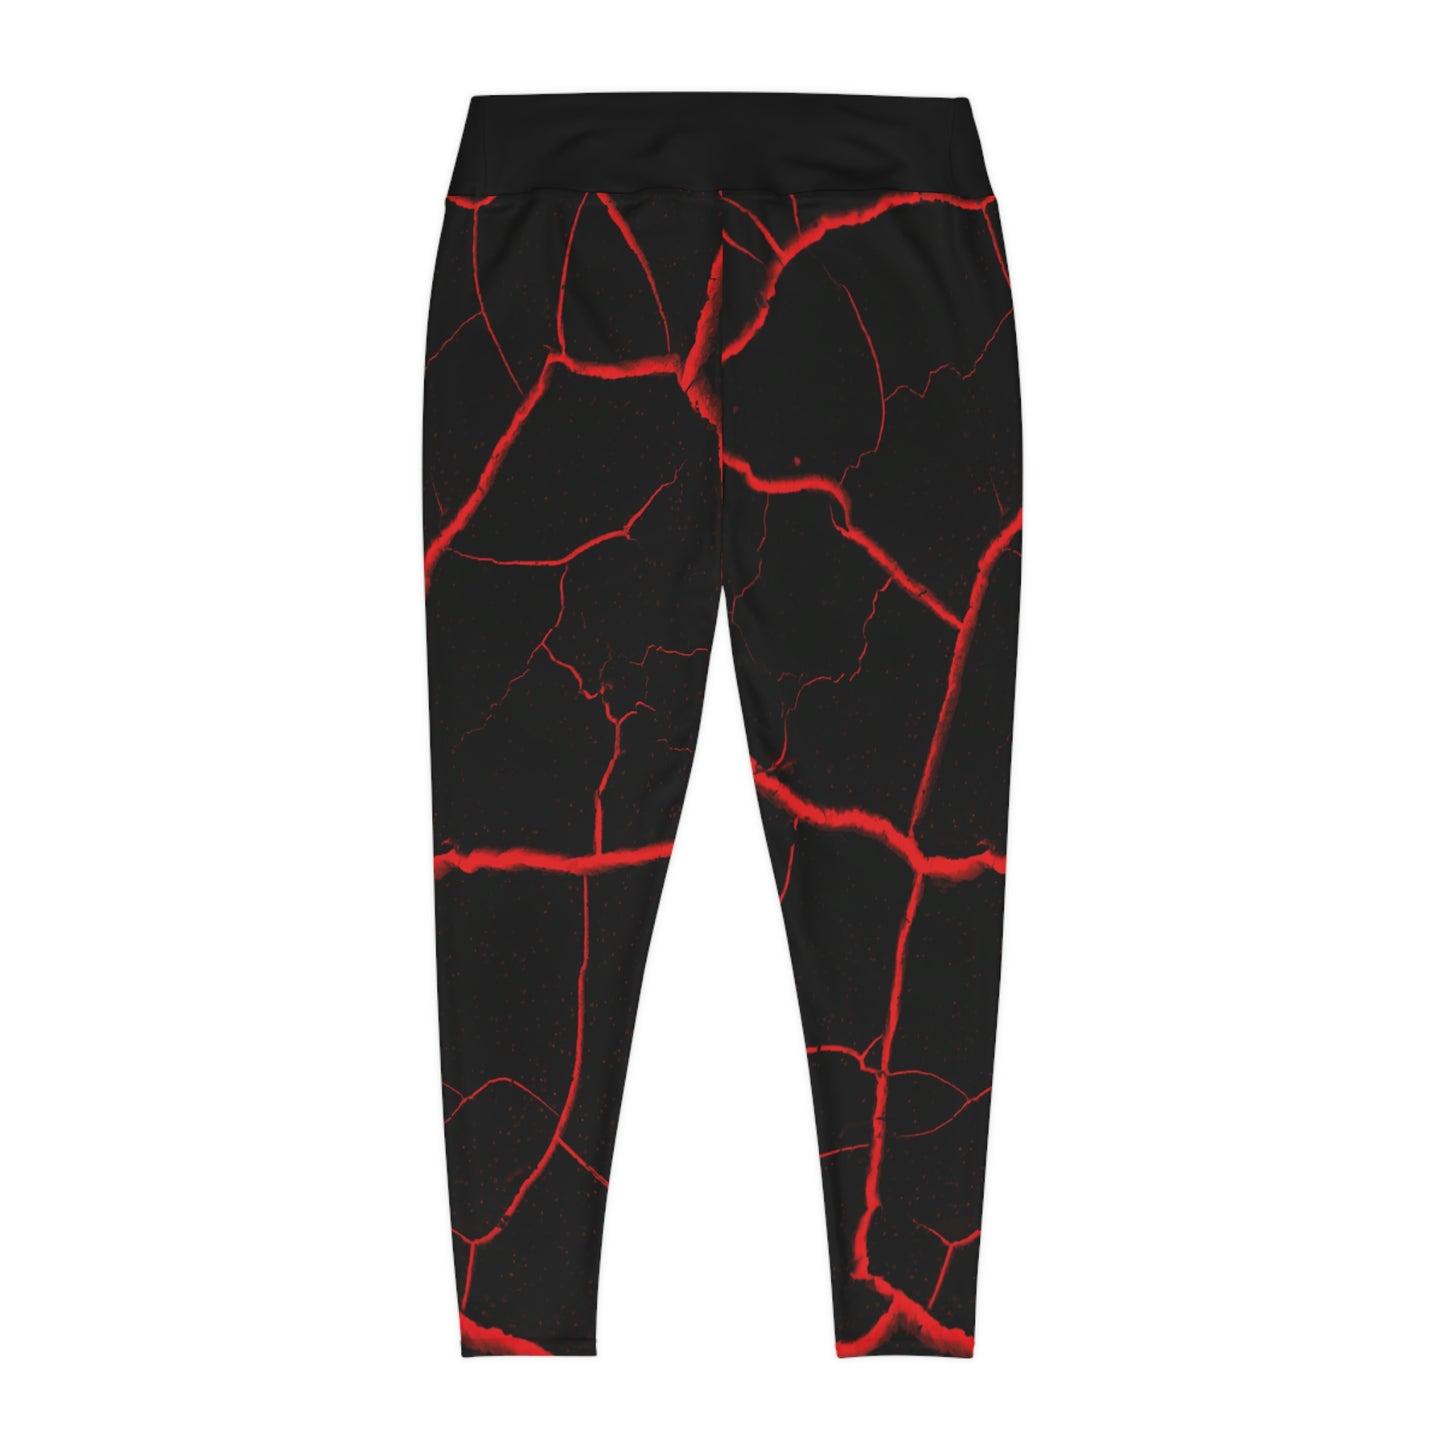 Lava Cute Summer Plus Size Leggings, One of a Kind Gift - Workout Activewear tights for Mothers Day, Girlfriend